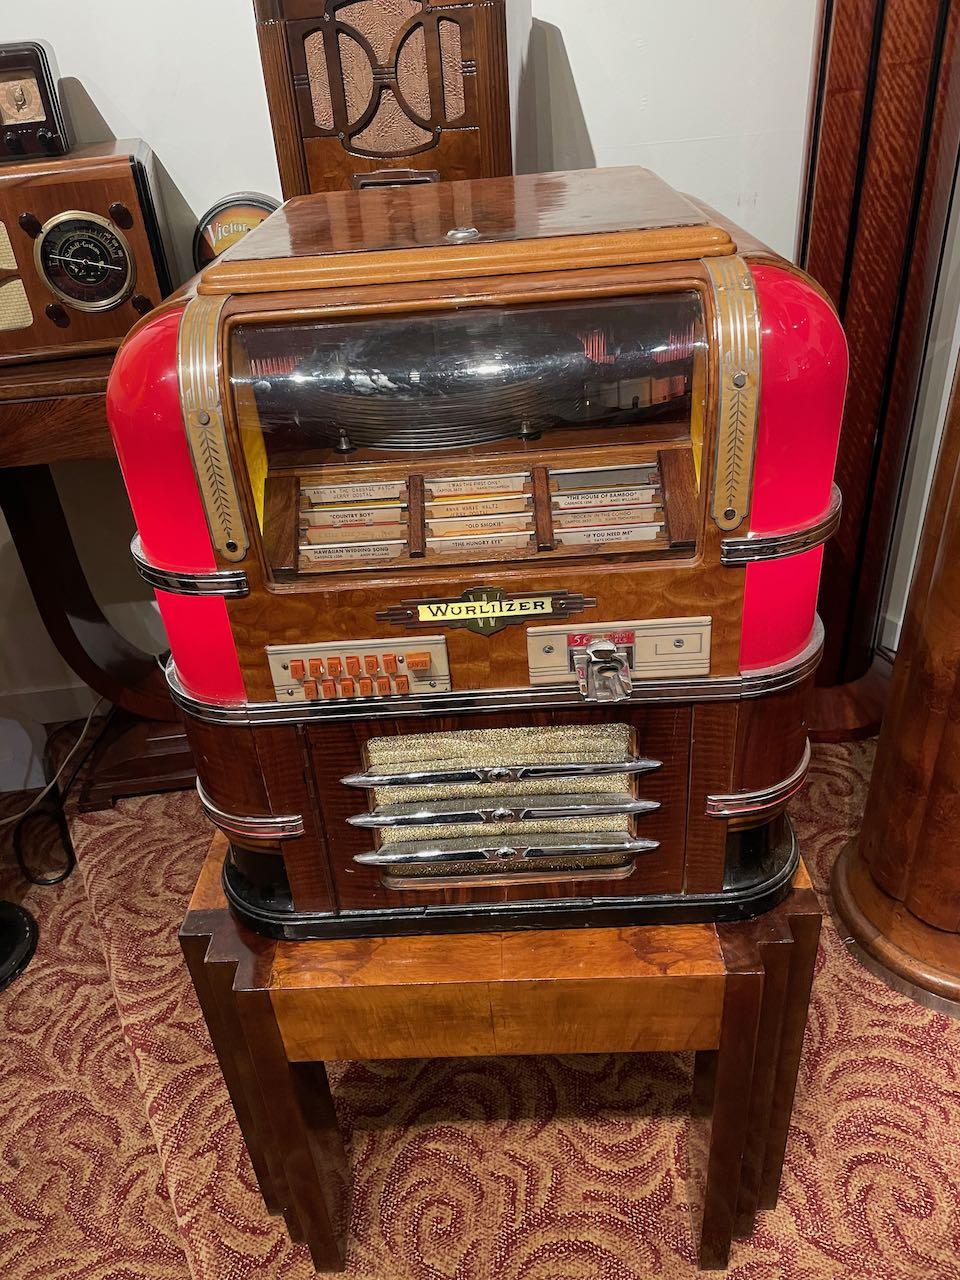 Wurlitzer model 61 countertop Jukebox, beautifully restored working circa 1939 by Paul Fuller. All working perfectly. Great looking tabletop, holds 12 78rpm records with all the lights, sound, volume control,  selectors, and ejecting records working